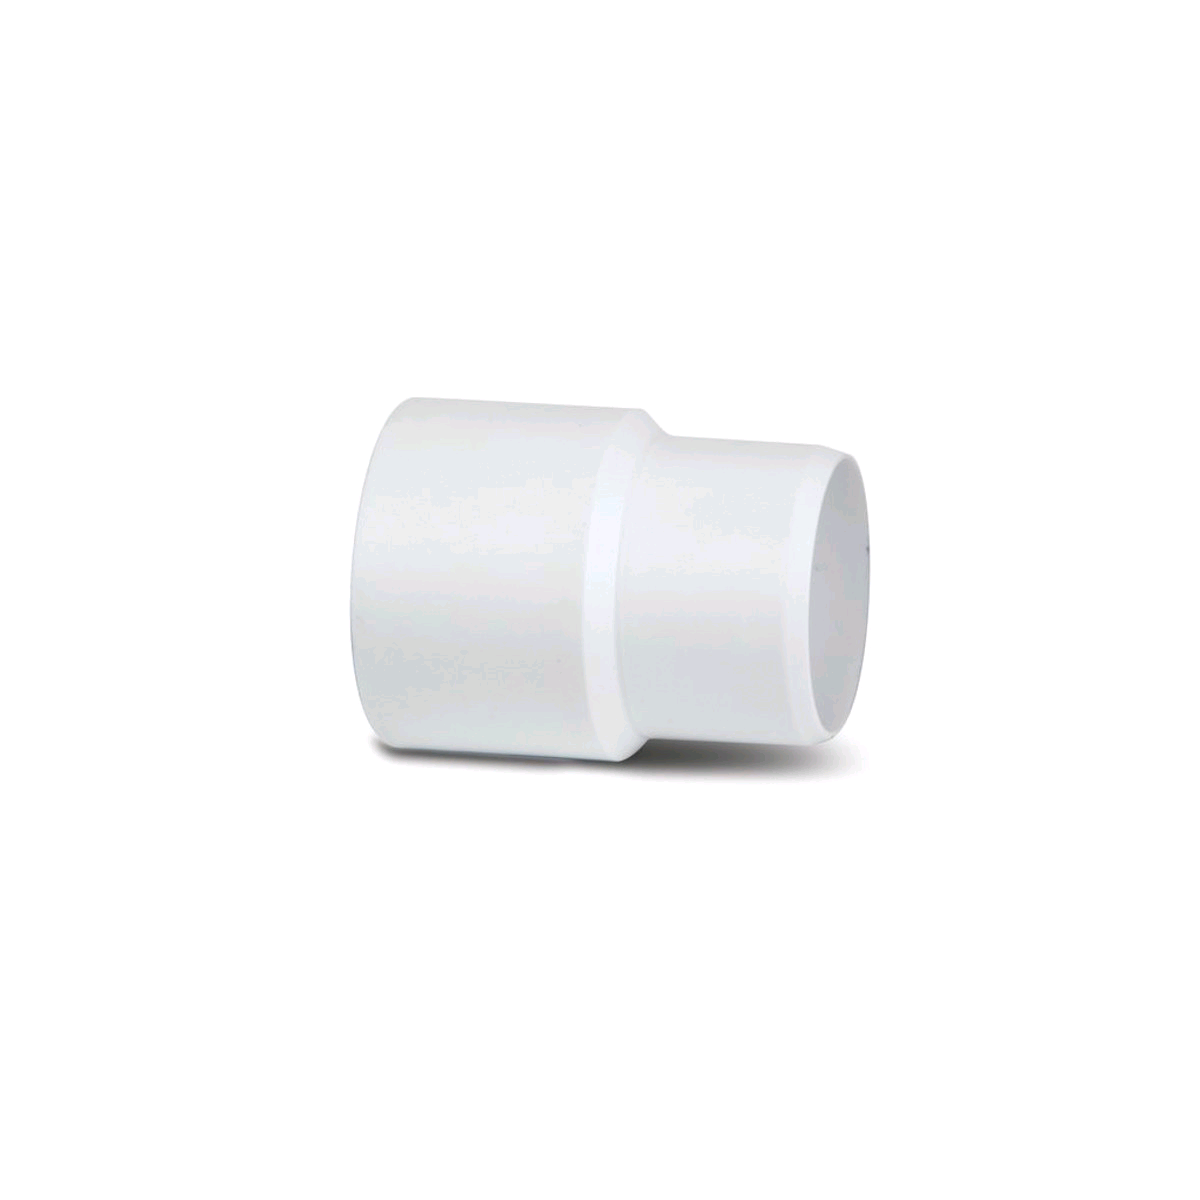 Polypipe 40mm Solvent Waste Adaptor for Waterless Valve 